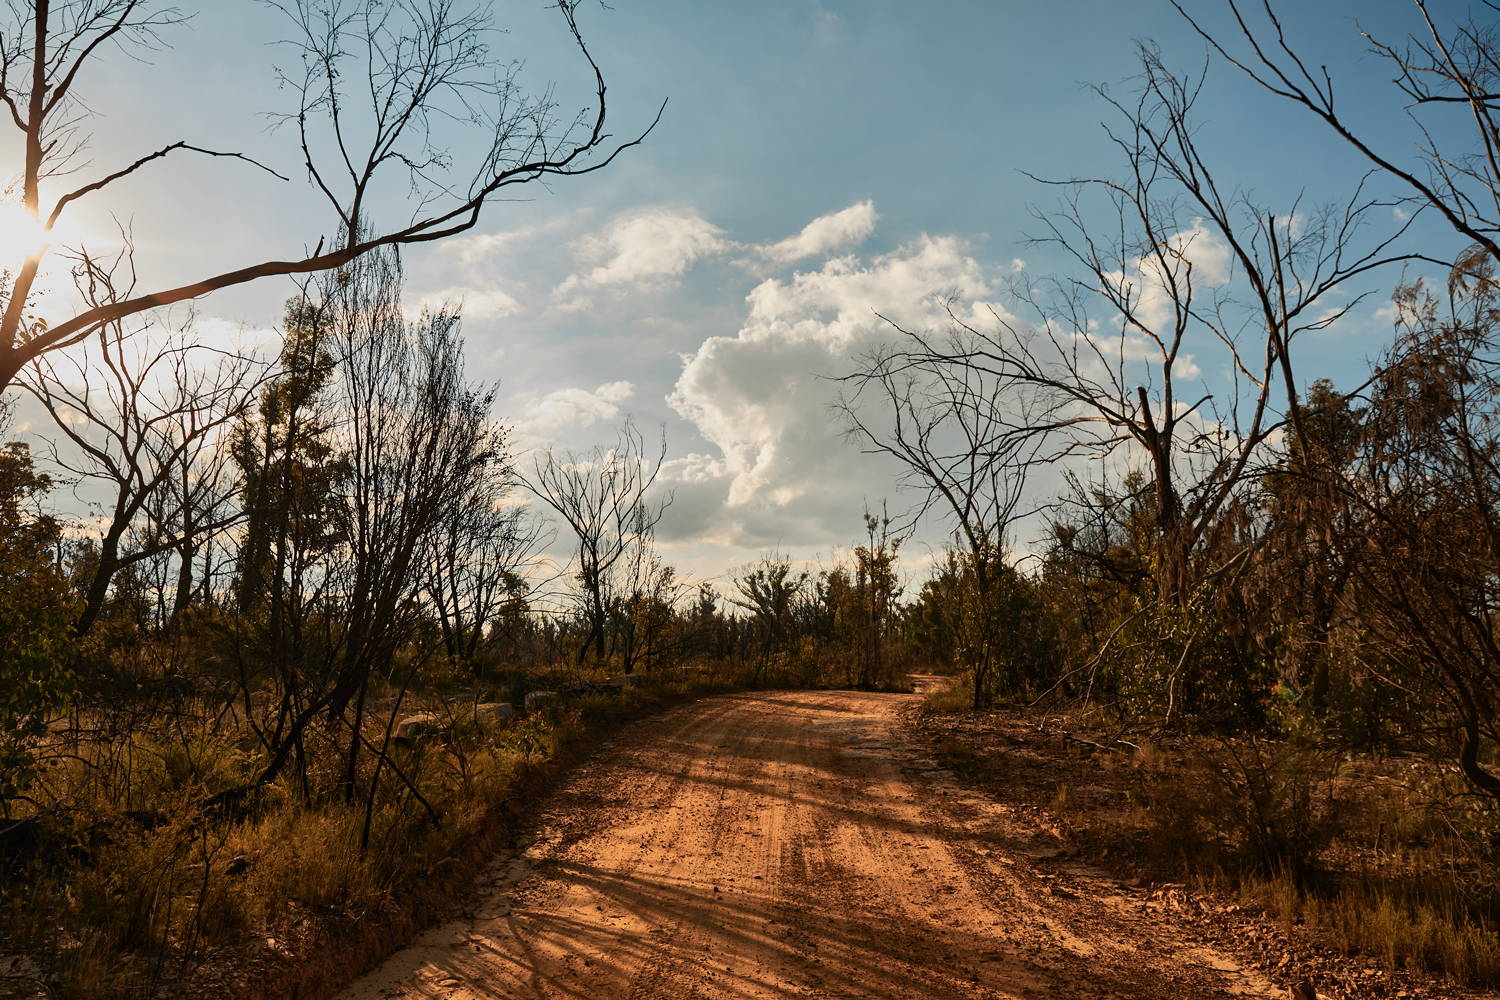 Damage from the 2019/2020 bushfires is still apparent in May 2021 at the Patterson Range Trail, in Bilpin NSW.